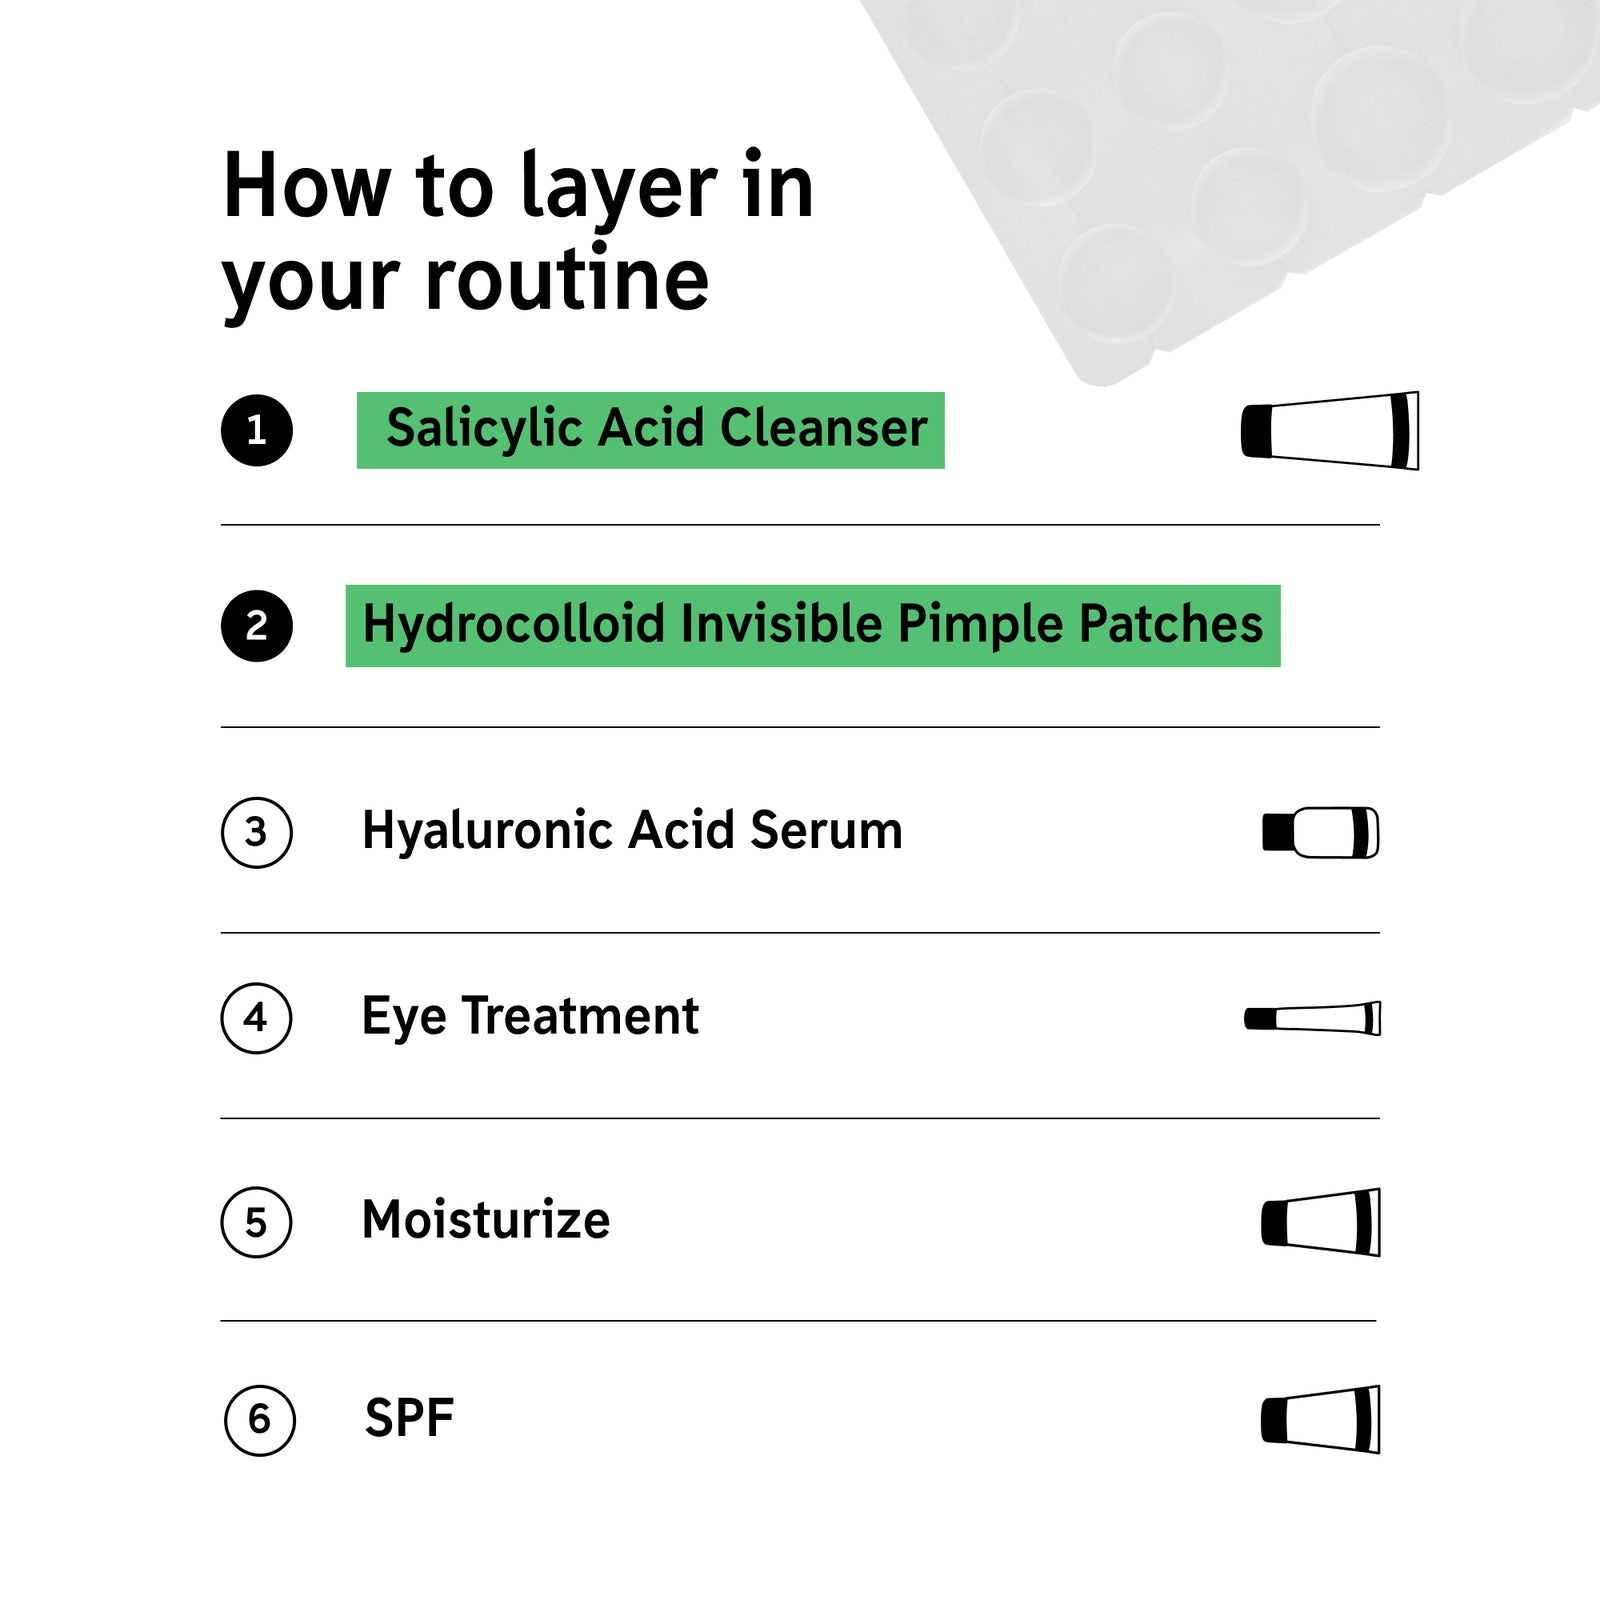 How to layer in your routine